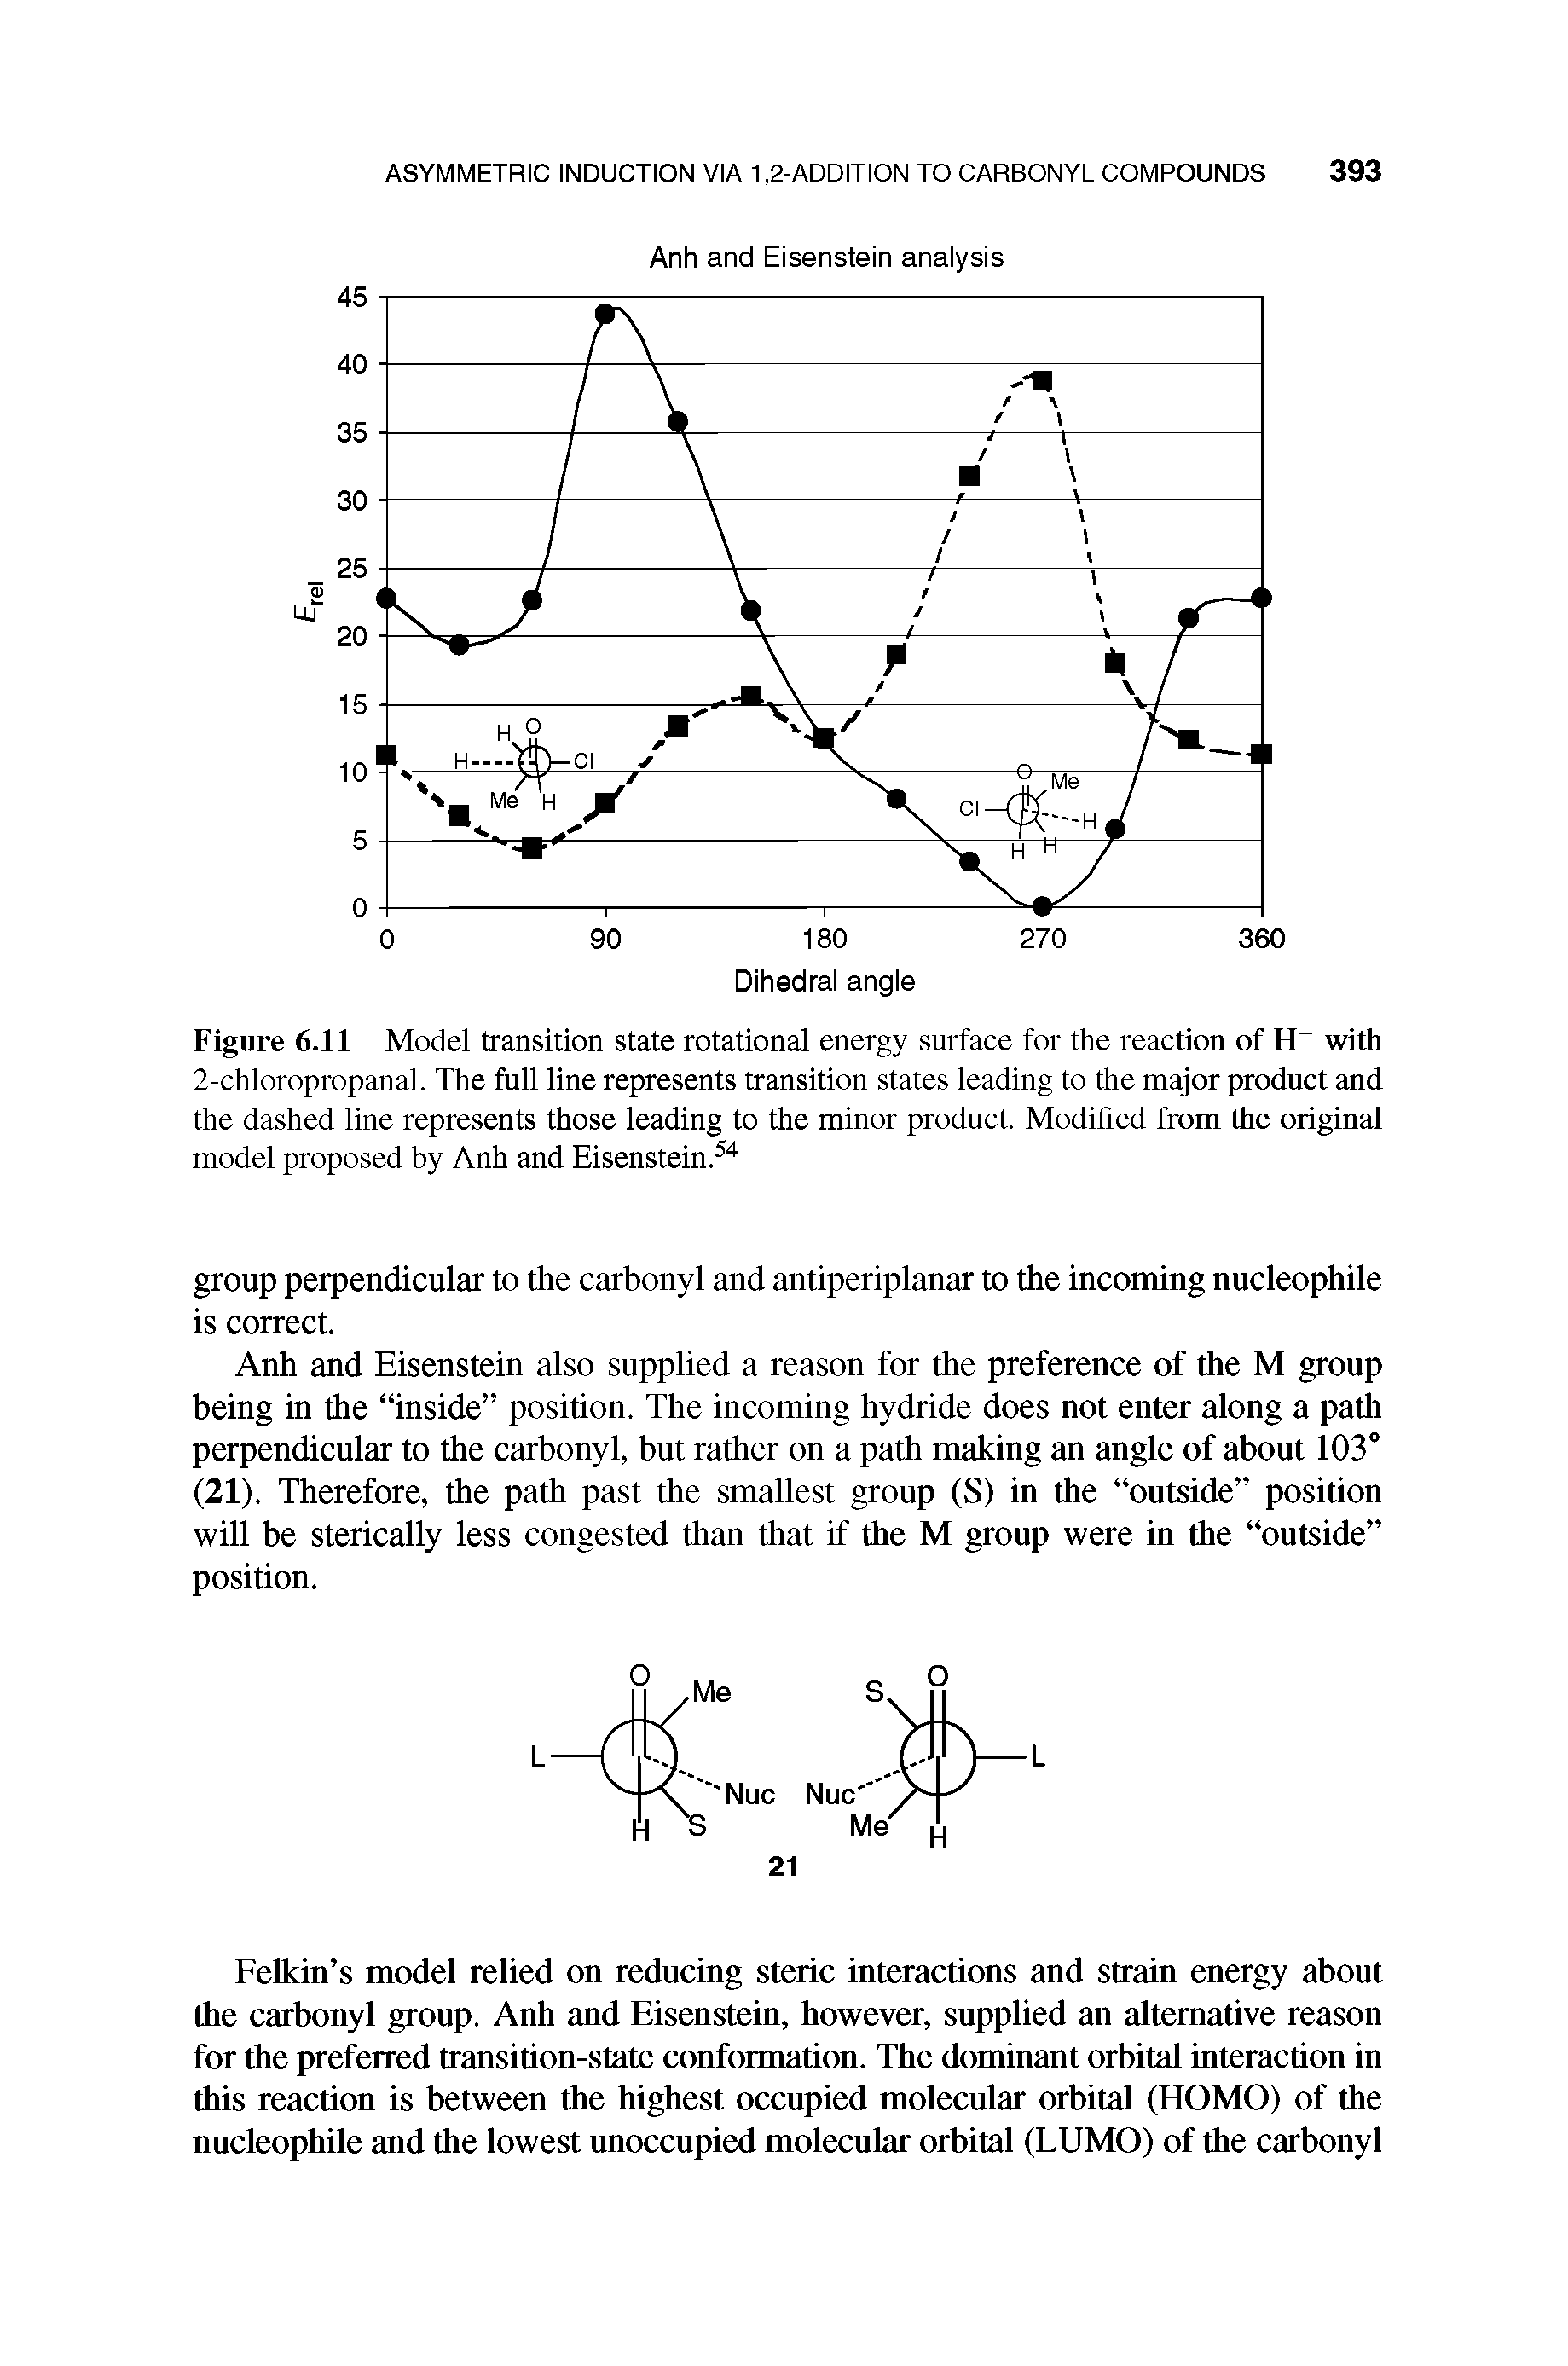 Figure 6.11 Model transition state rotational energy surface for the reaction of H with 2-chloropropanal. The fuU line represents transition states leading to the major product and the dashed line represents those leading to the minor product. Modrhed from the original model proposed by Anh and Eisenstein. ...